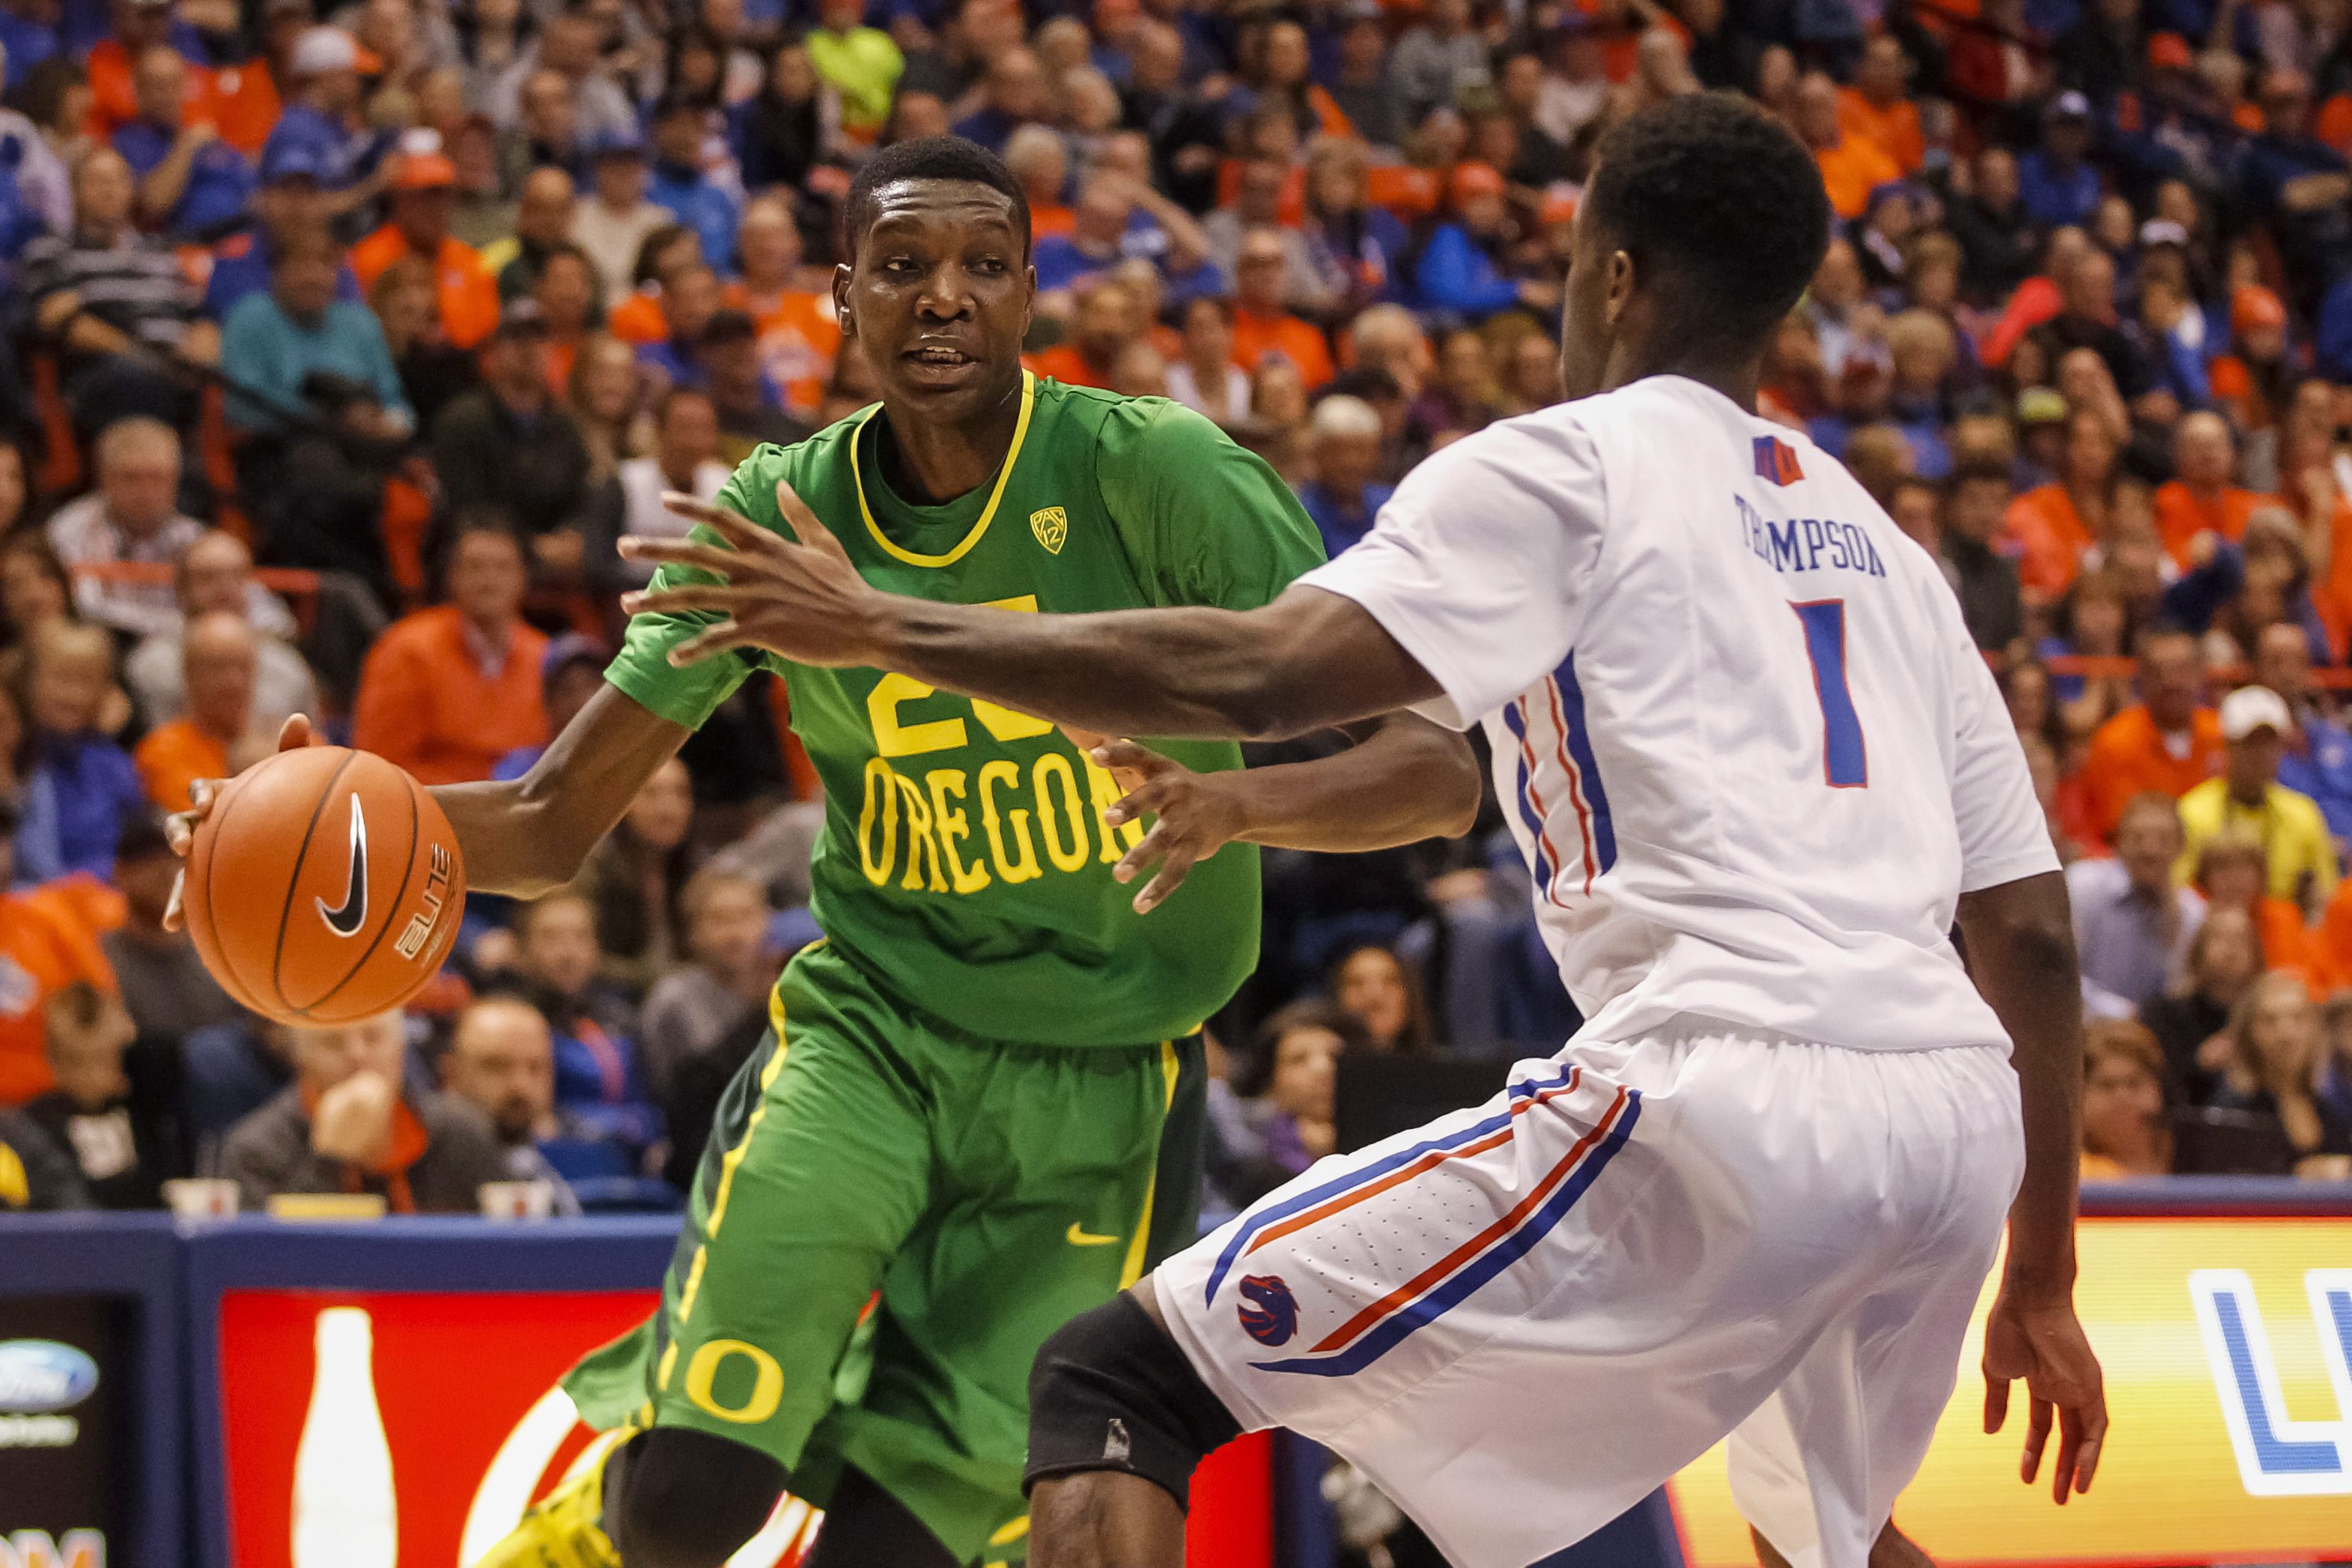 Oregon's Chris Boucher, left, moves the ball against Boise State's Mikey Thompson, right, during the first half of an NCAA college basketball game in Boise, Idaho, on Saturday, Dec. 12, 2015. (AP Photo/Otto Kitsinger)